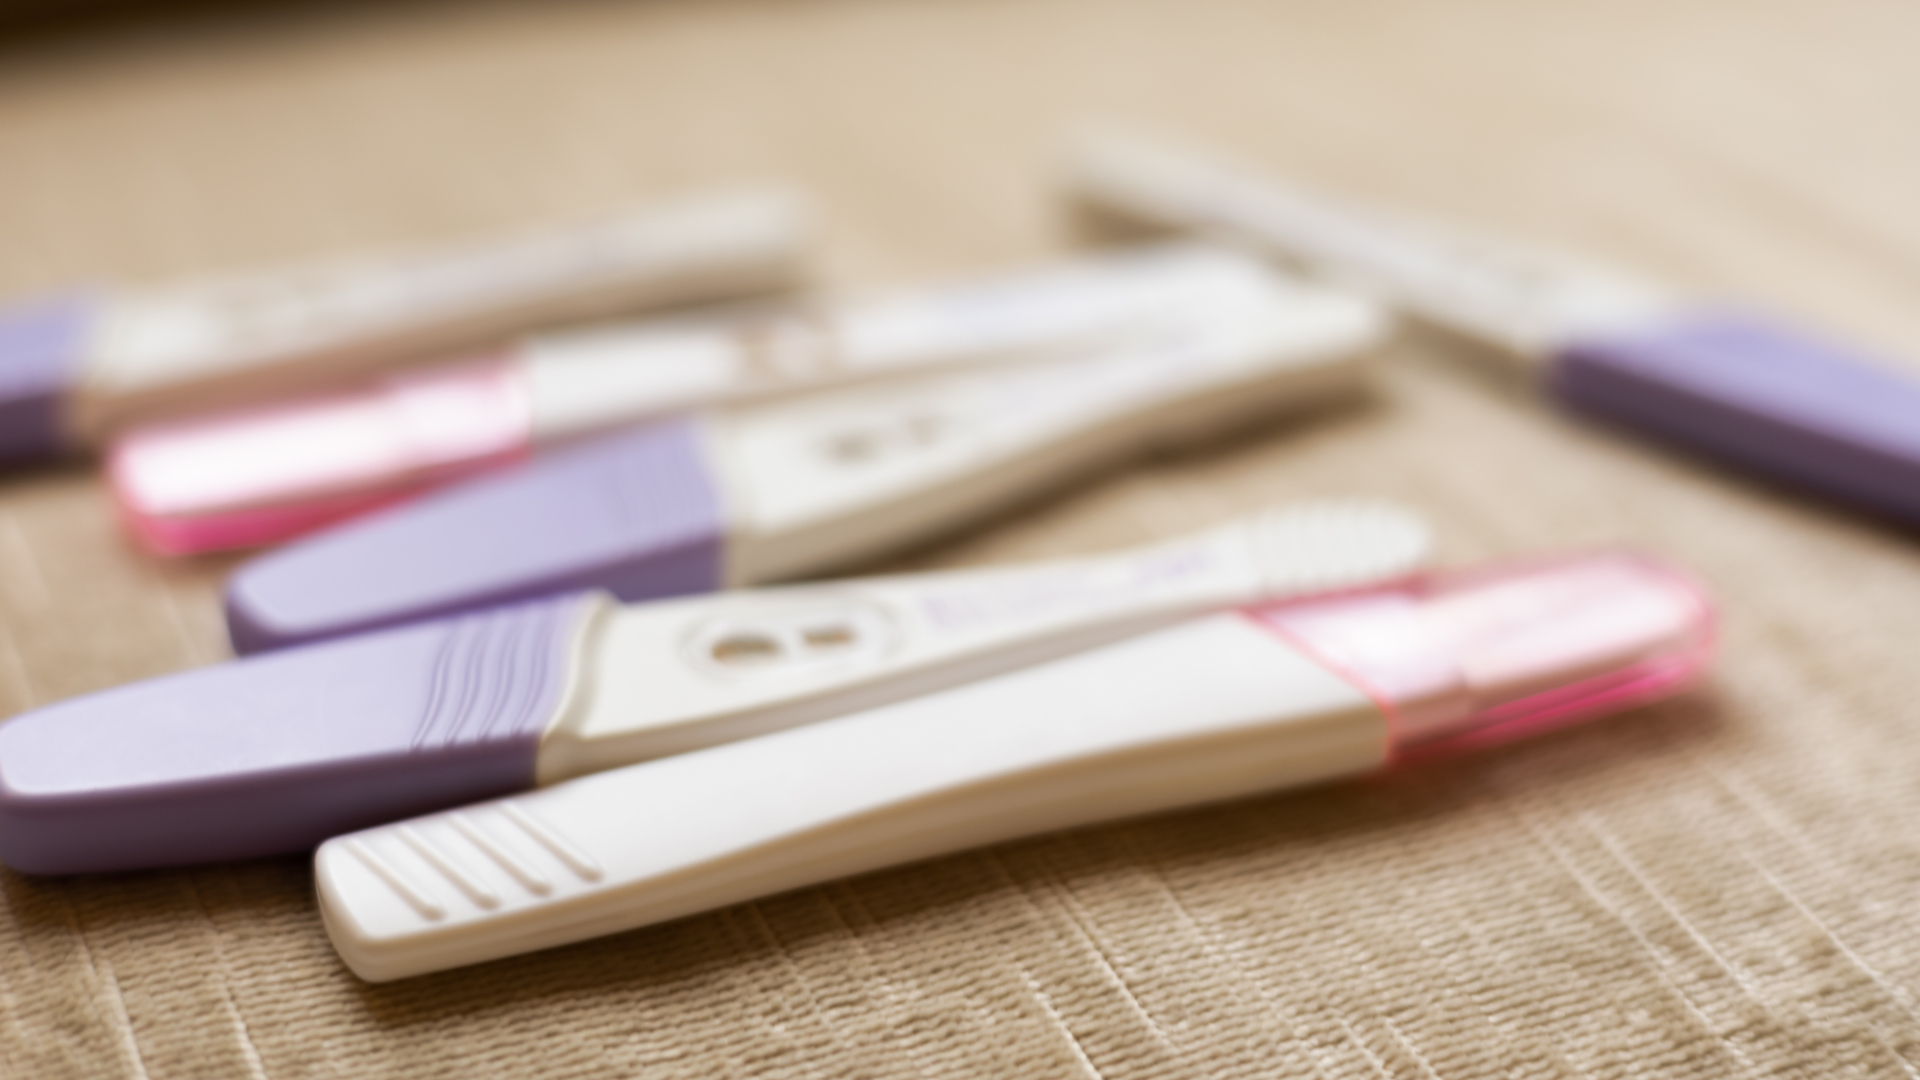 An assortment of at-home pregnancy tests